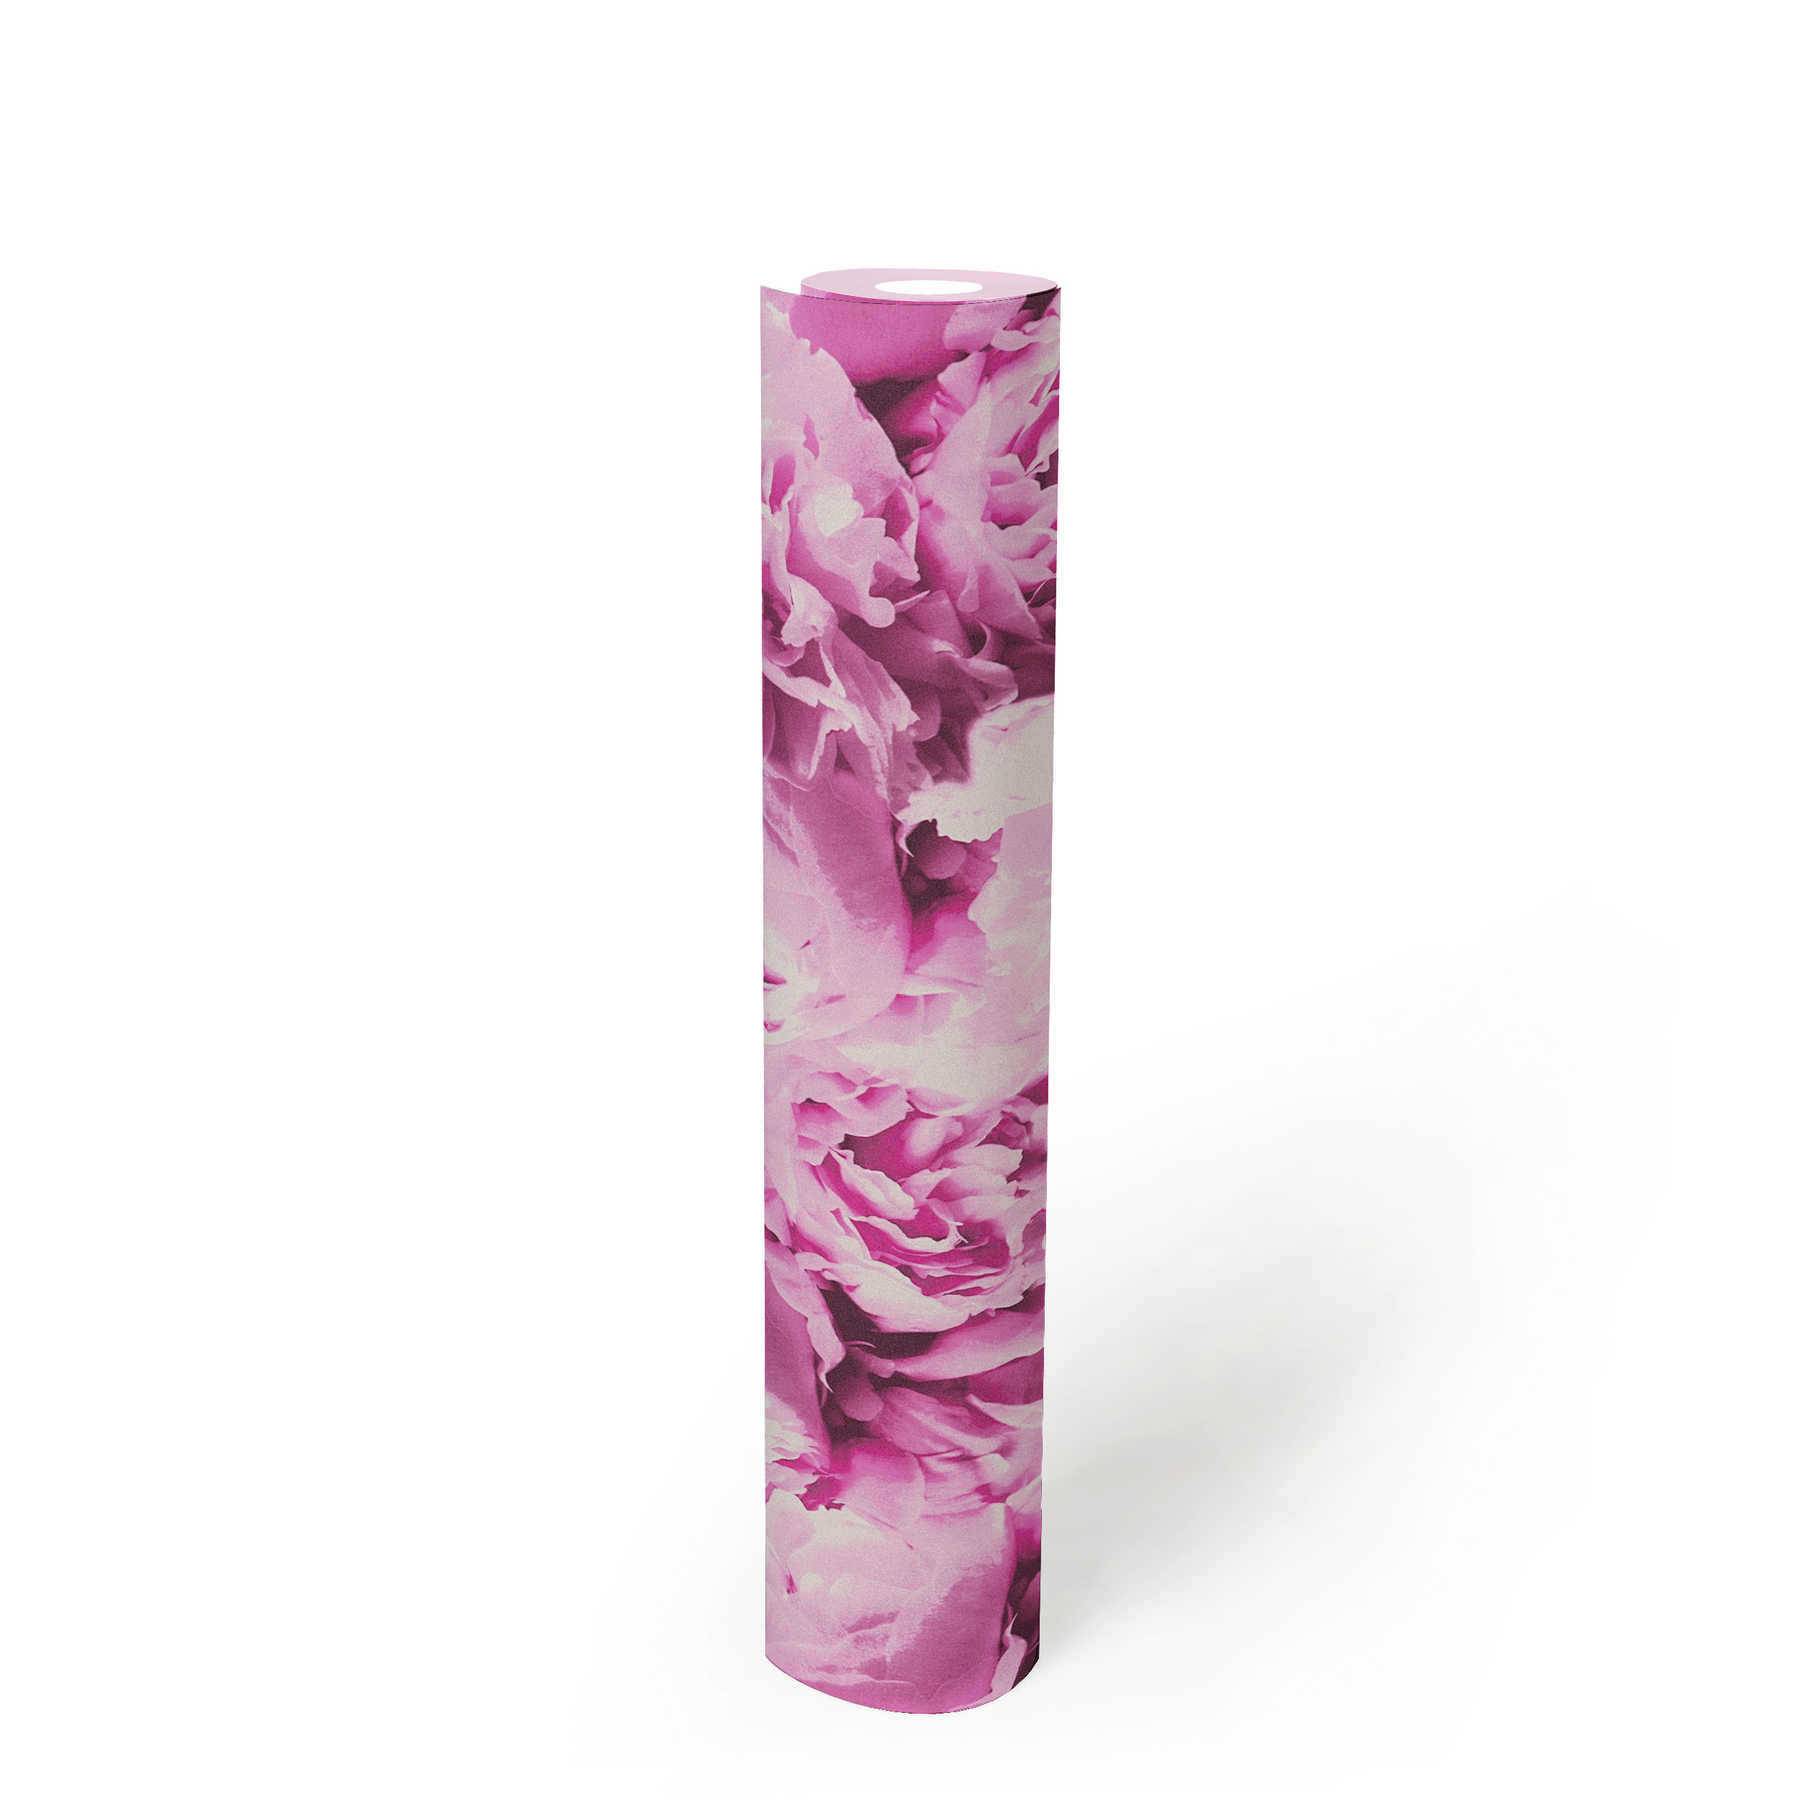             Floral wallpaper roses with shimmer effect - pink
        